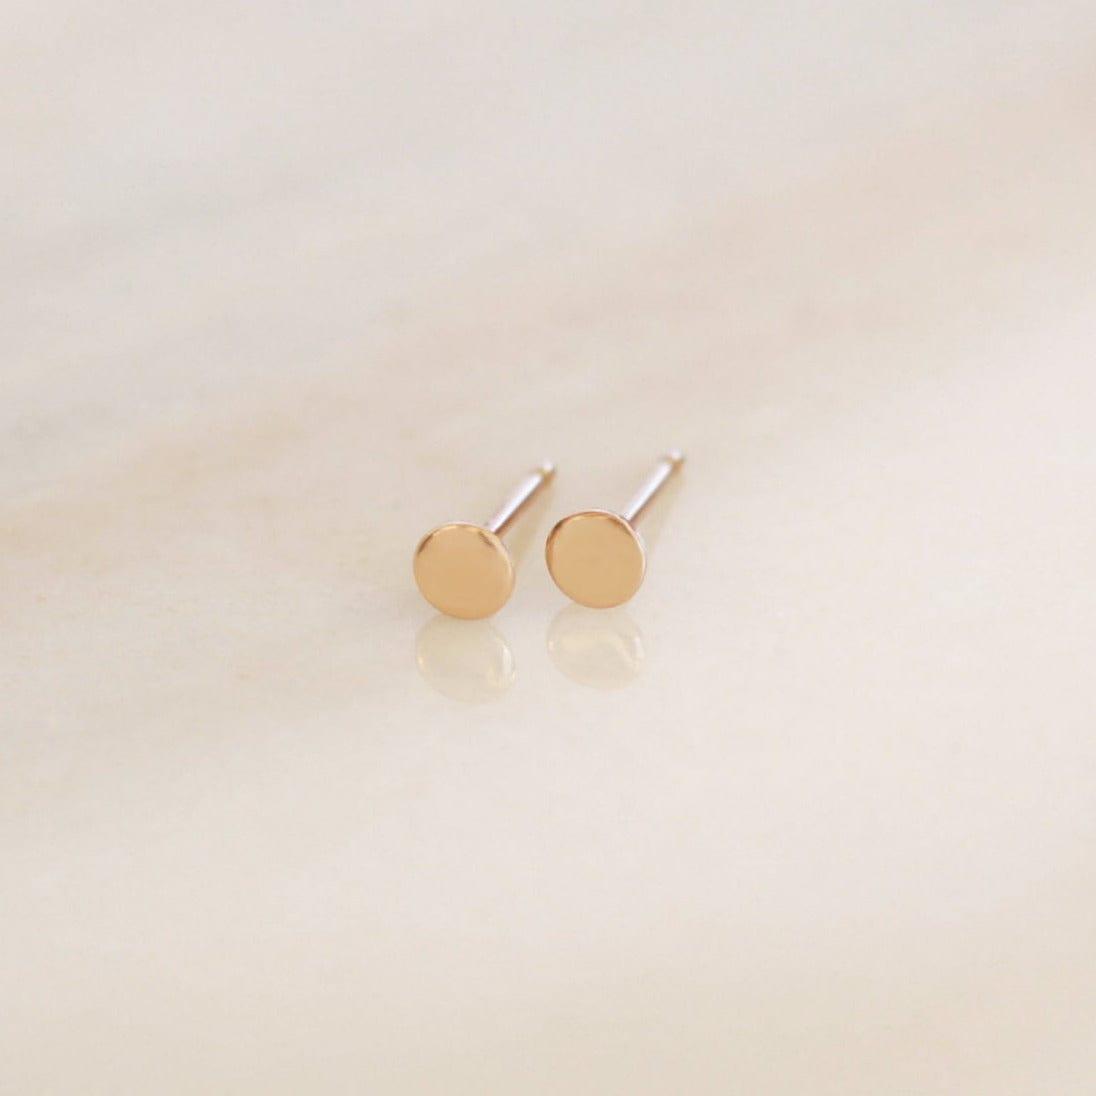 Tiny Dot Stud Earrings - Nolia Jewelry - Meaningful + Sustainably Handcrafted Jewelry